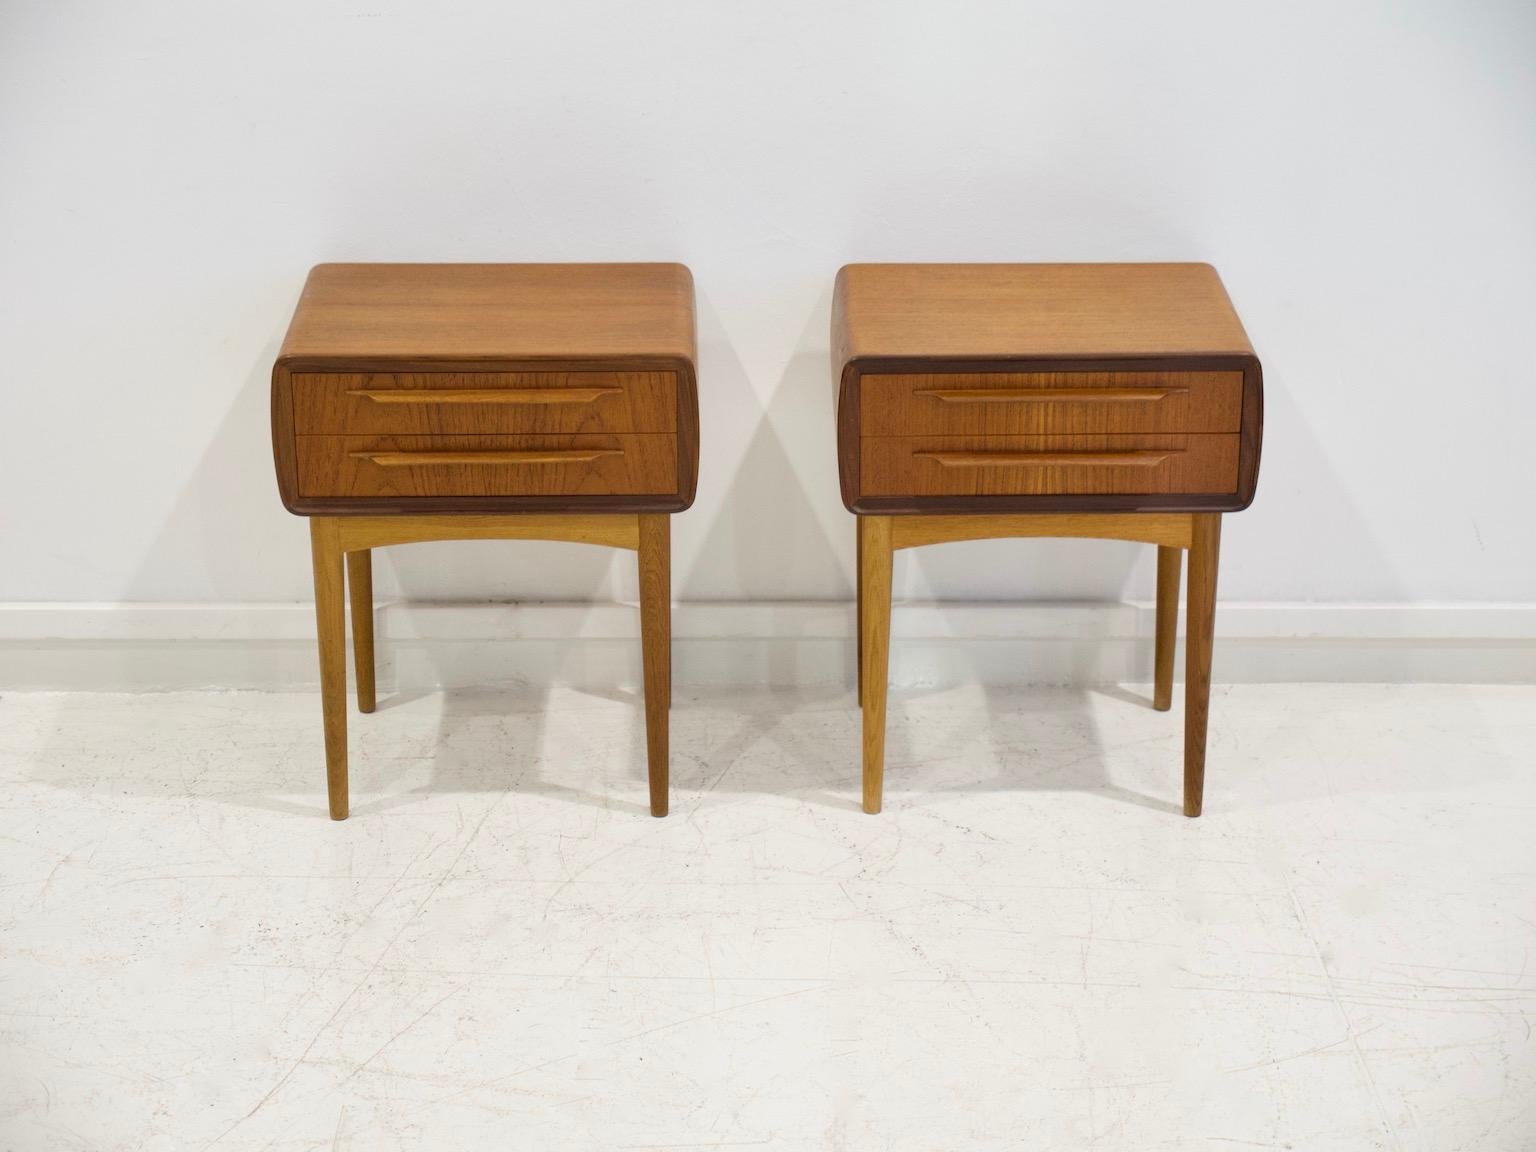 Pair of cube-shaped night stands made of veneered teak. Front with two drawers, round tapered legs of solid teak. Designed by Johannes Andersen and manufactured by CFC Silkeborg.